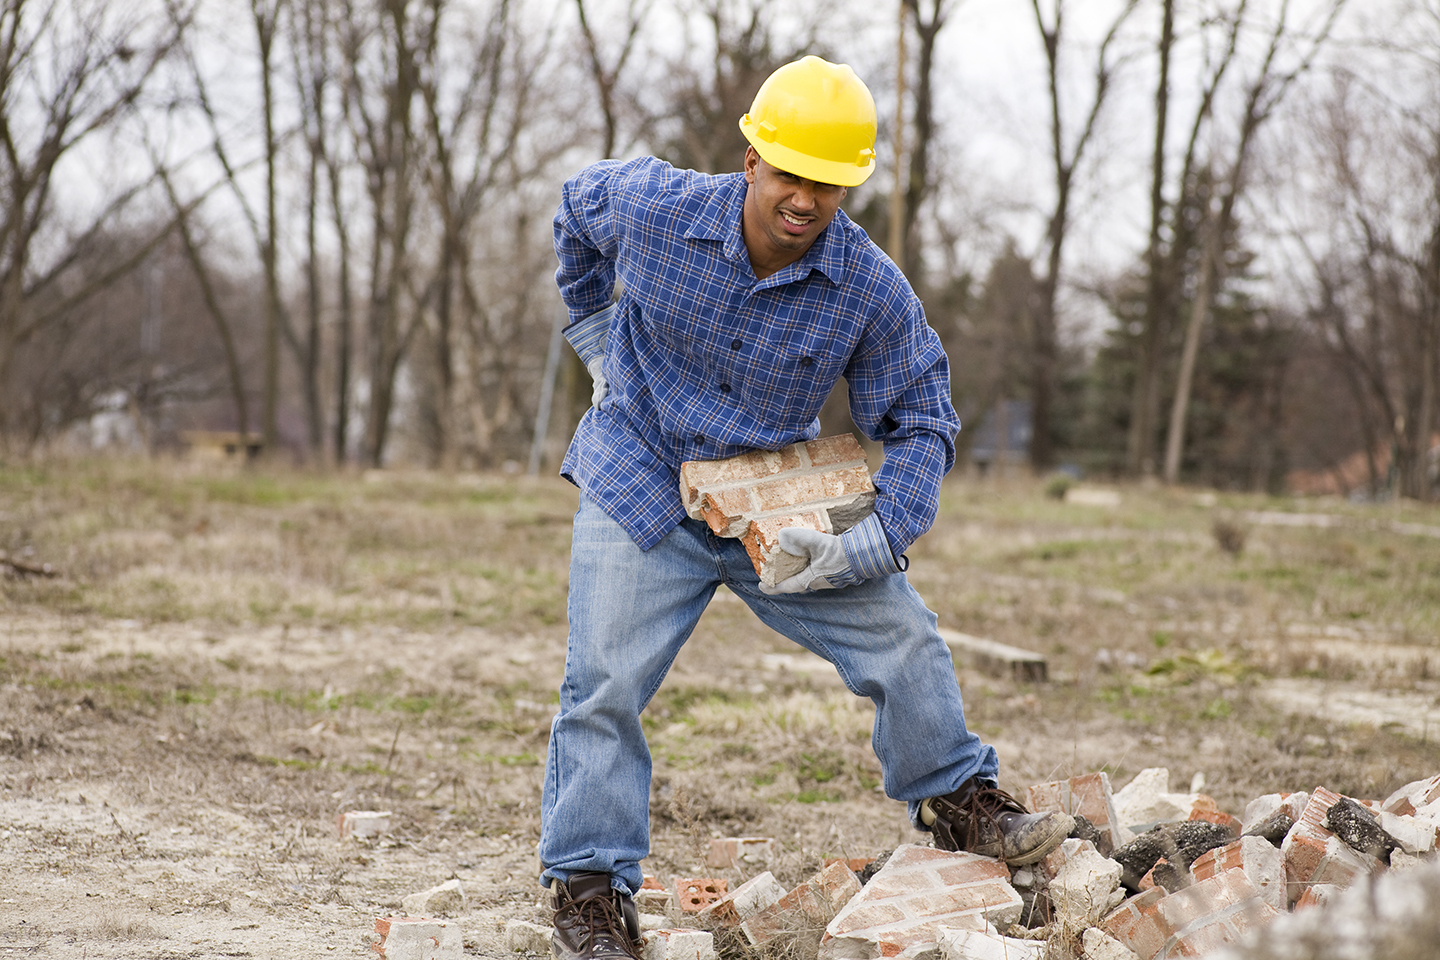 A worker in a hard hat and blue shirt carries bricks at a construction site.